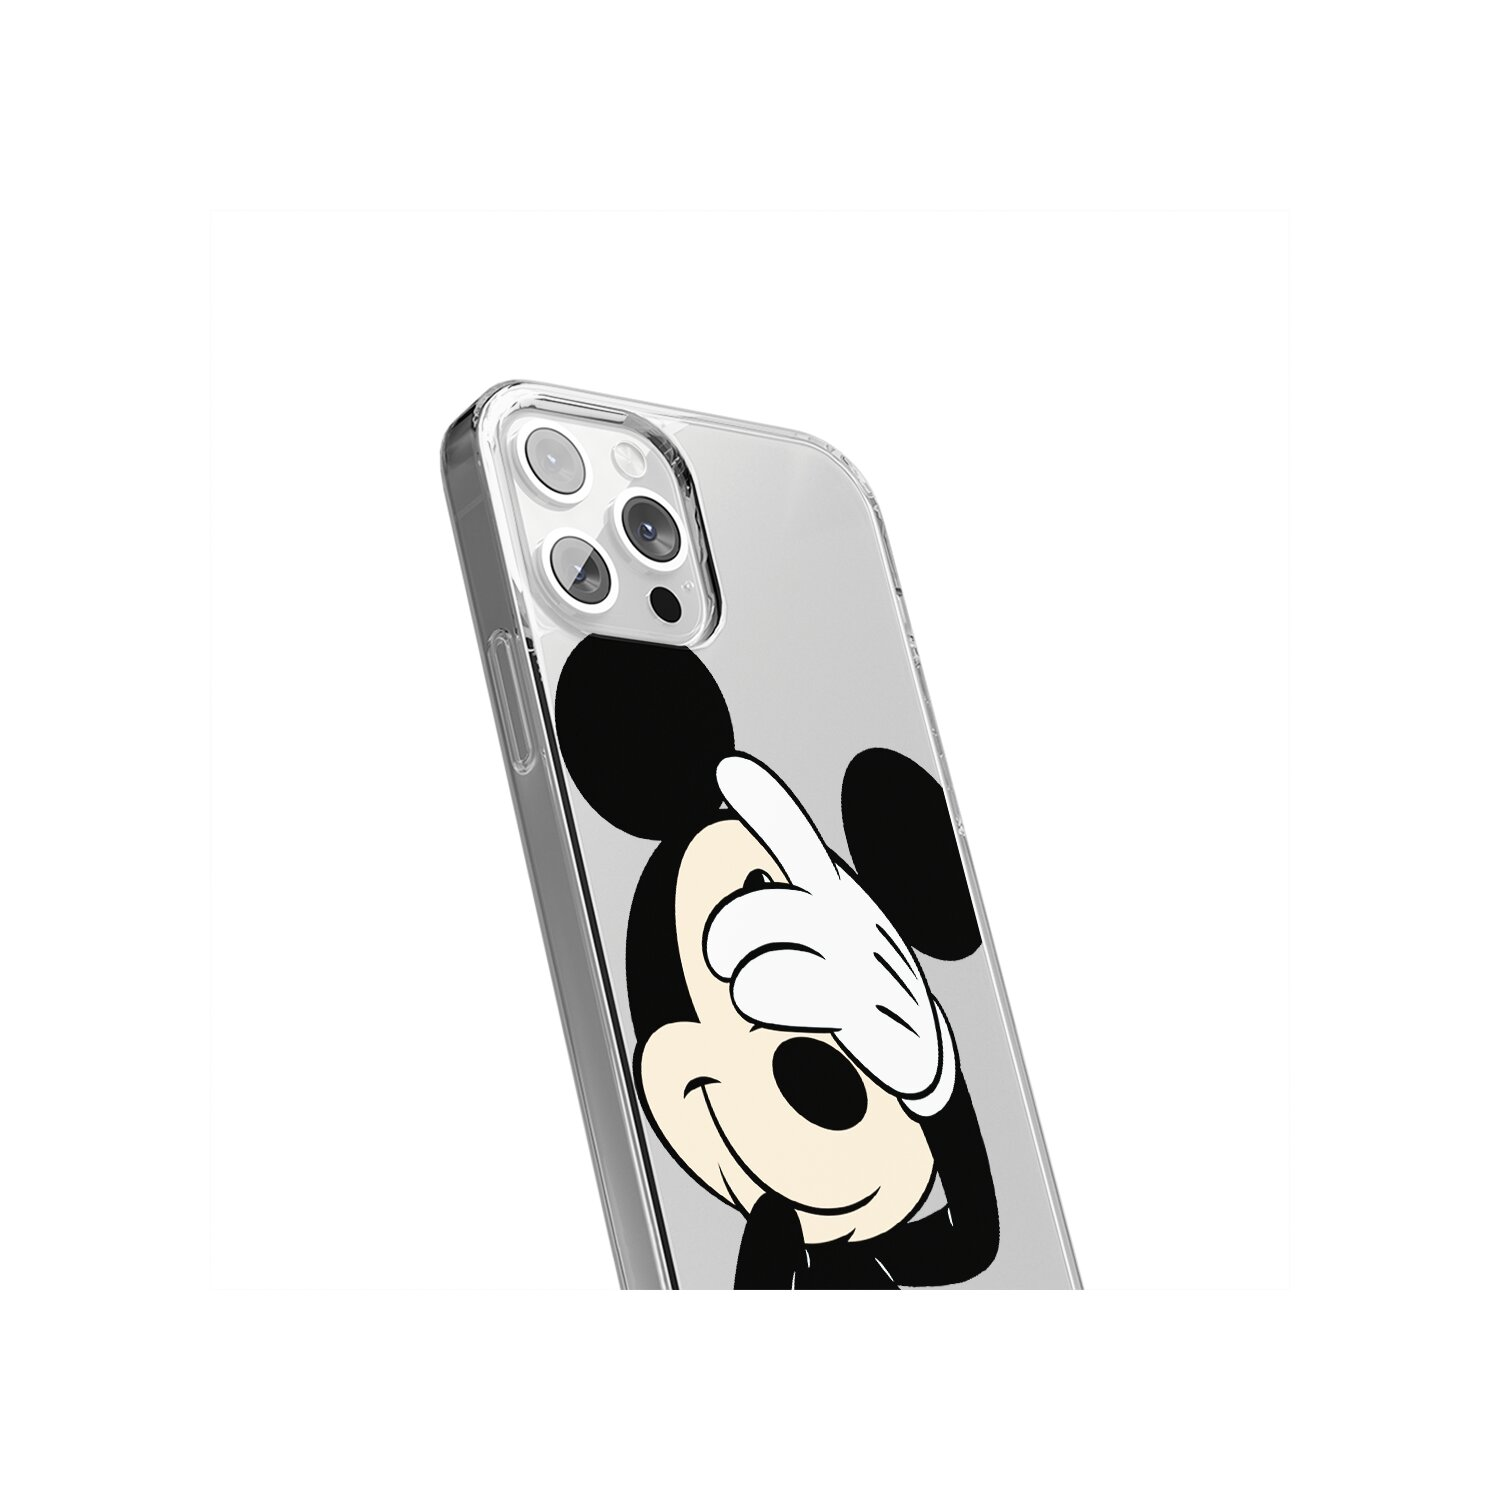 DISNEY Mickey 003 iPhone Pro, Apple, Backcover, Partial Transparent Print, 15